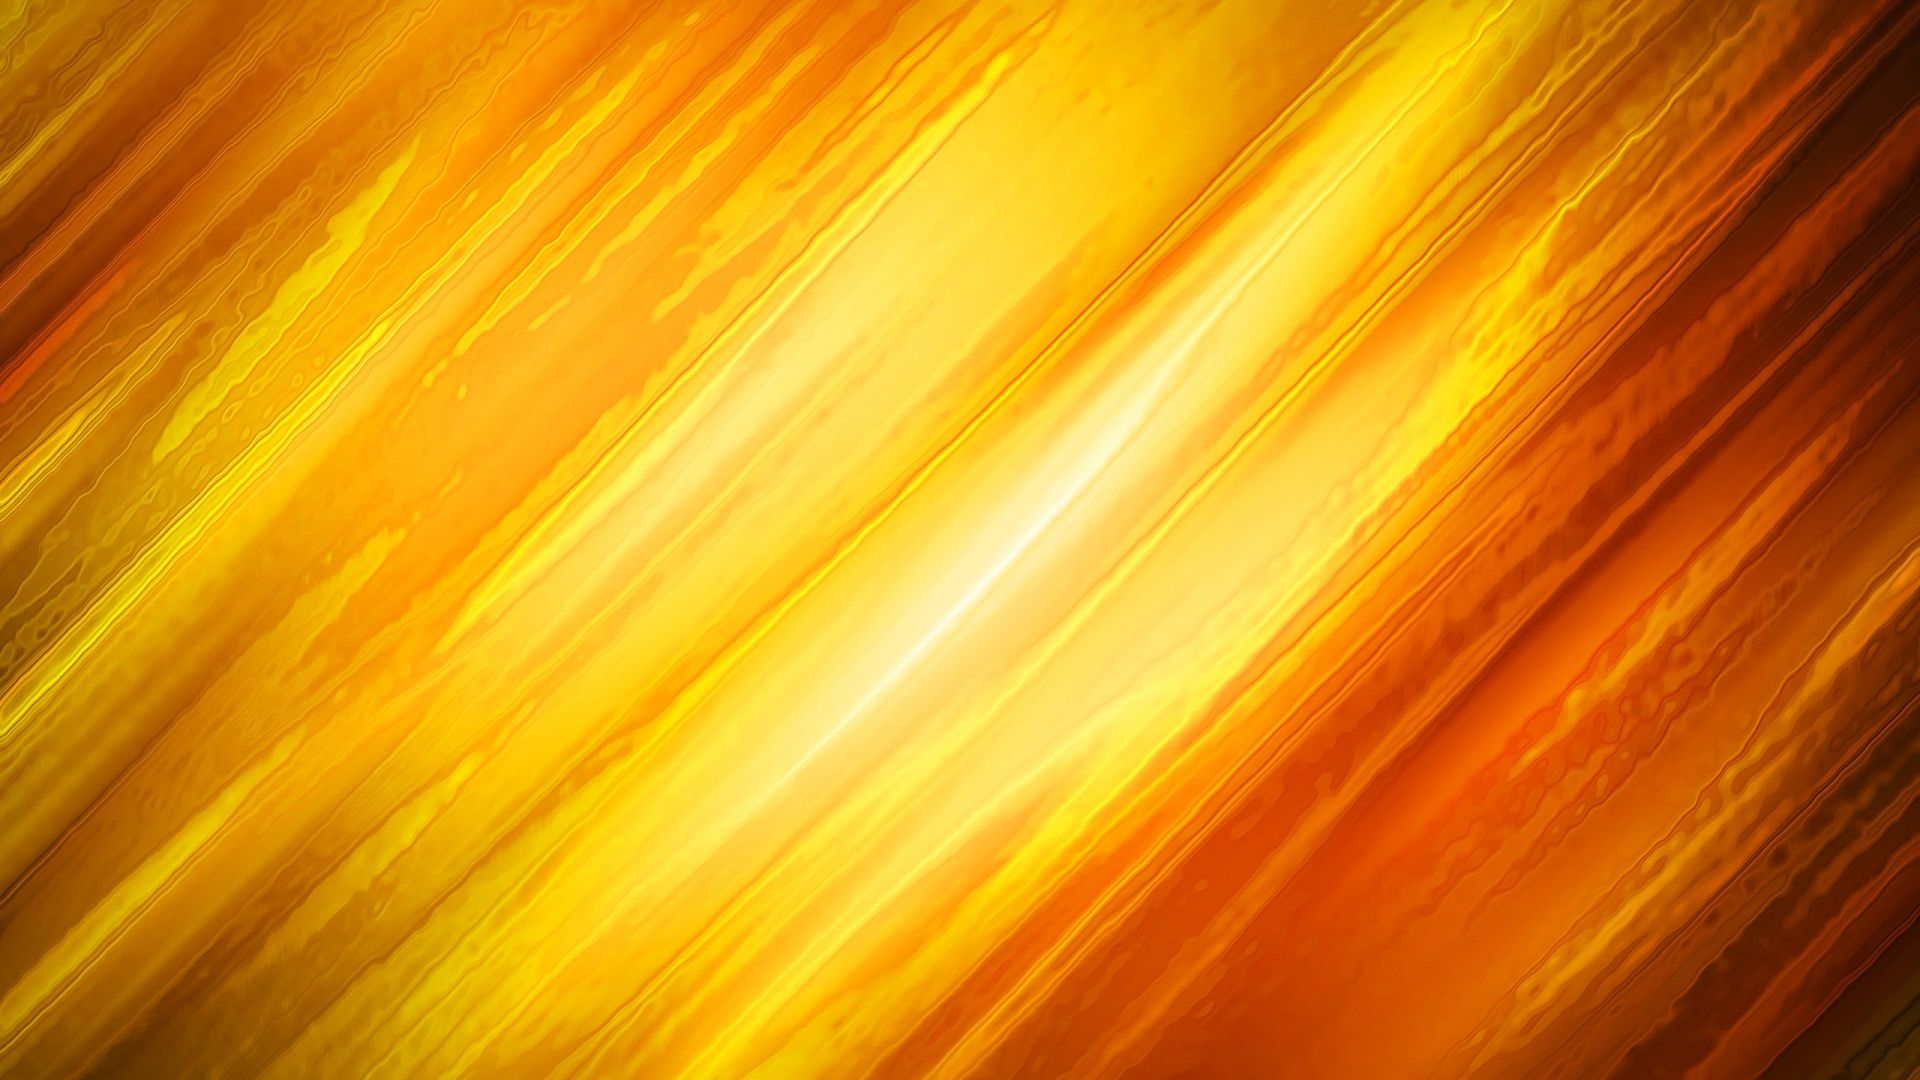 IMAGE | cool yellow backgrounds